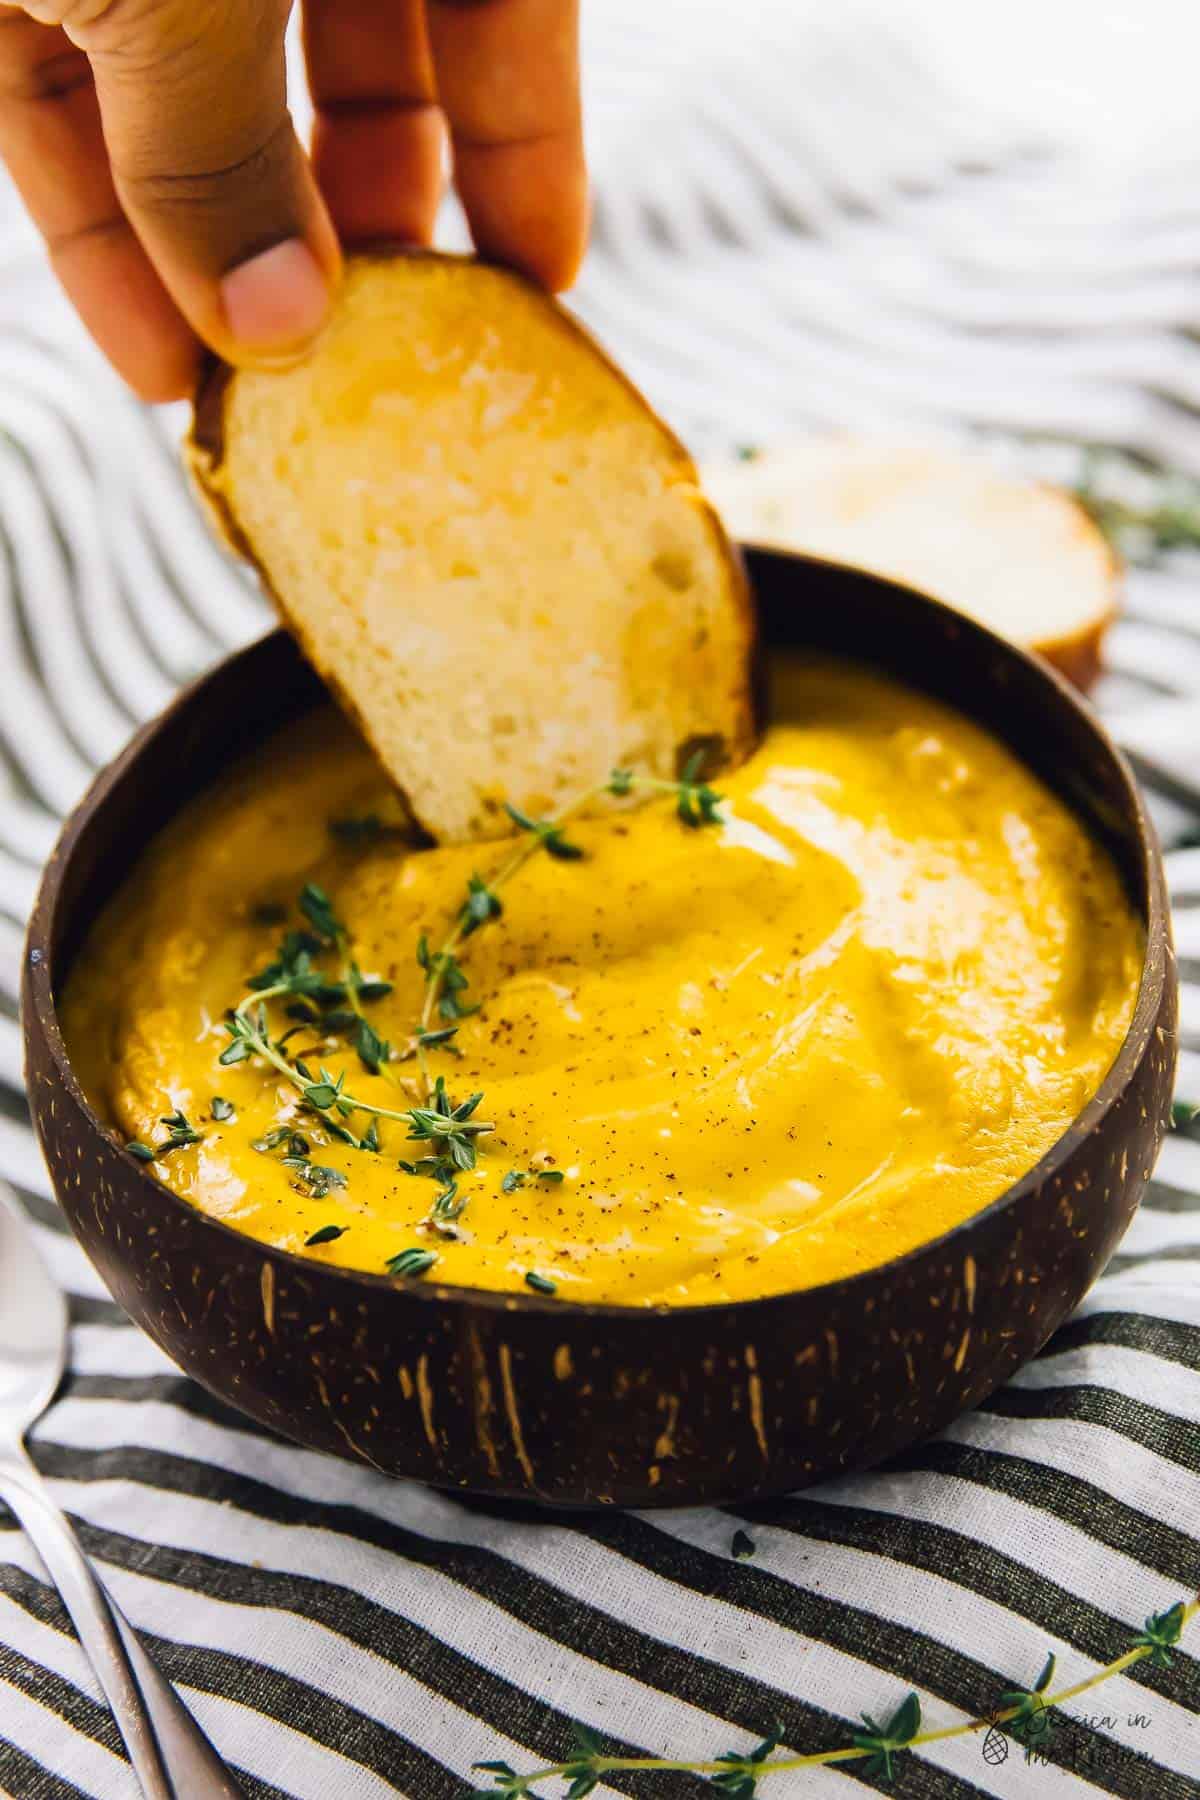 Hand dipping bread into a bowl of soup.